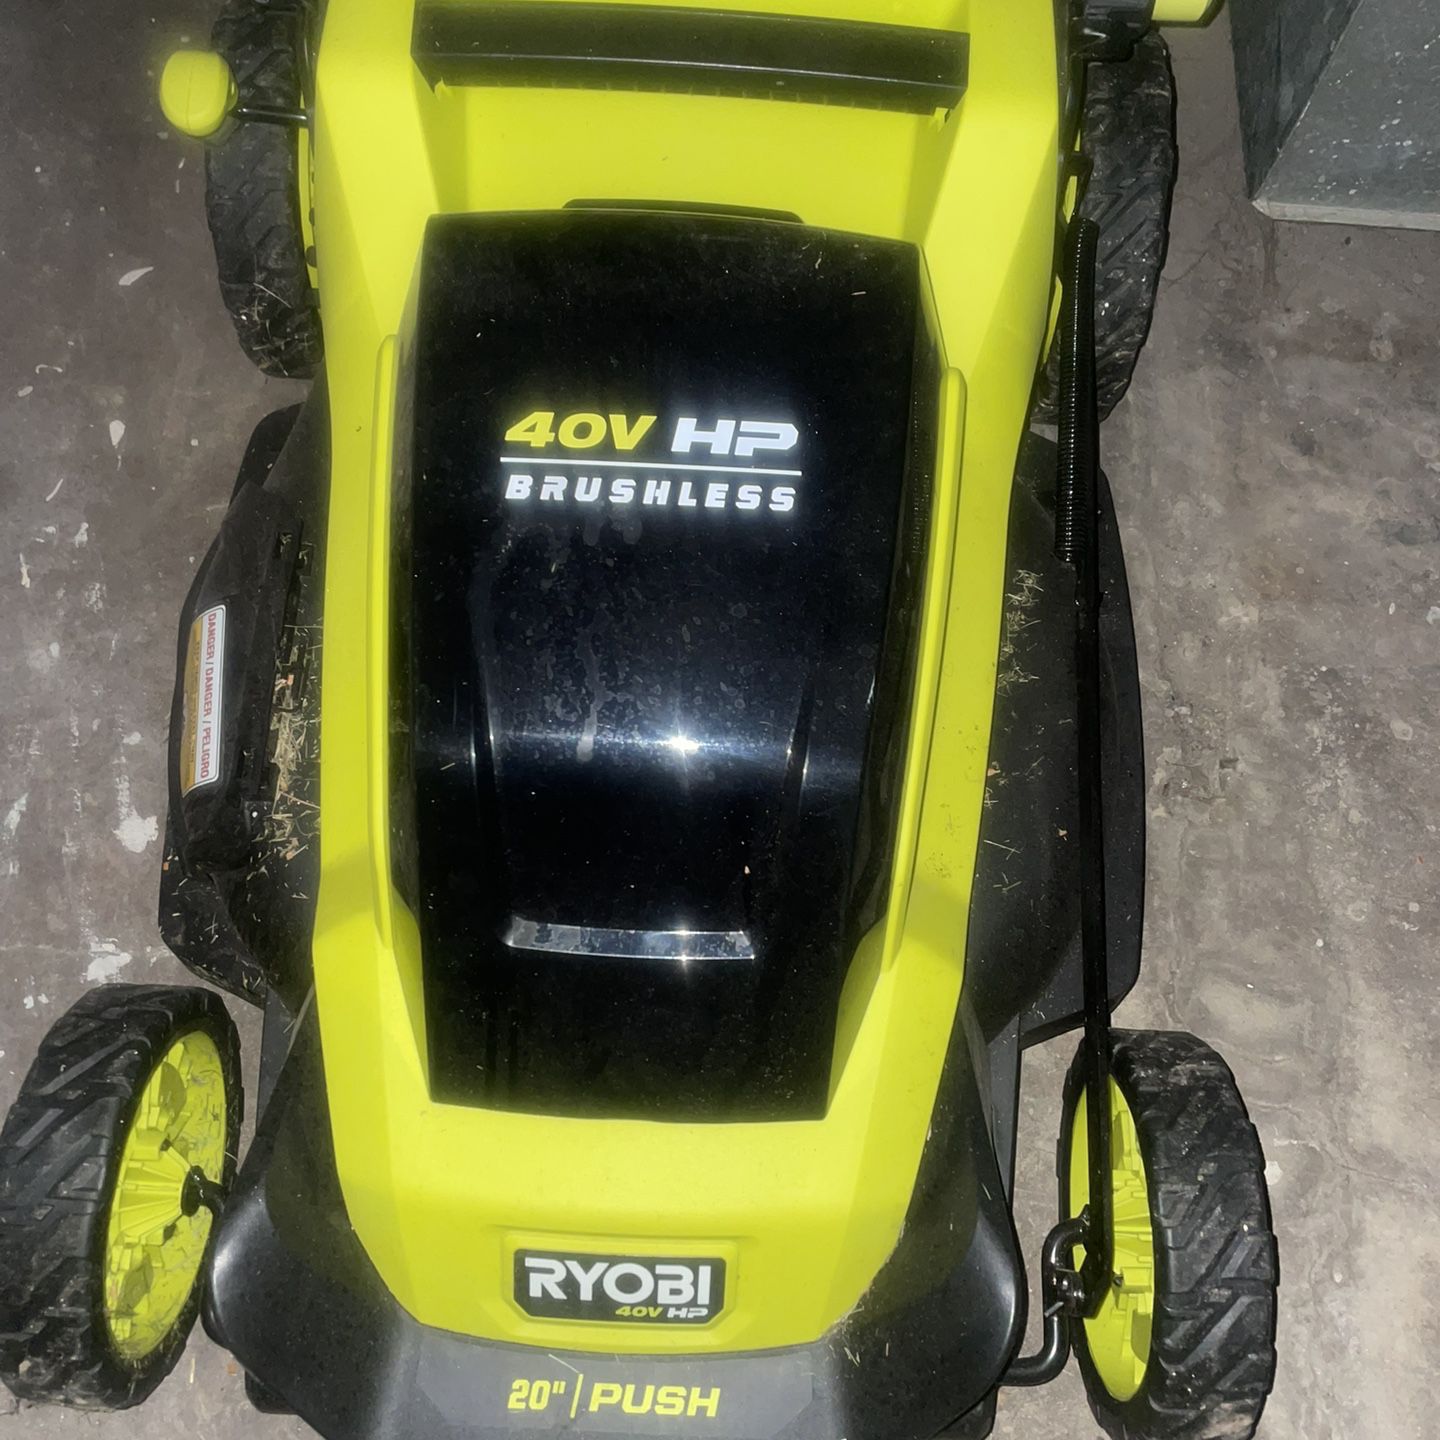 40V HP Brushless 20 in. Cordless Lawnmower (Father’s Day Gift)